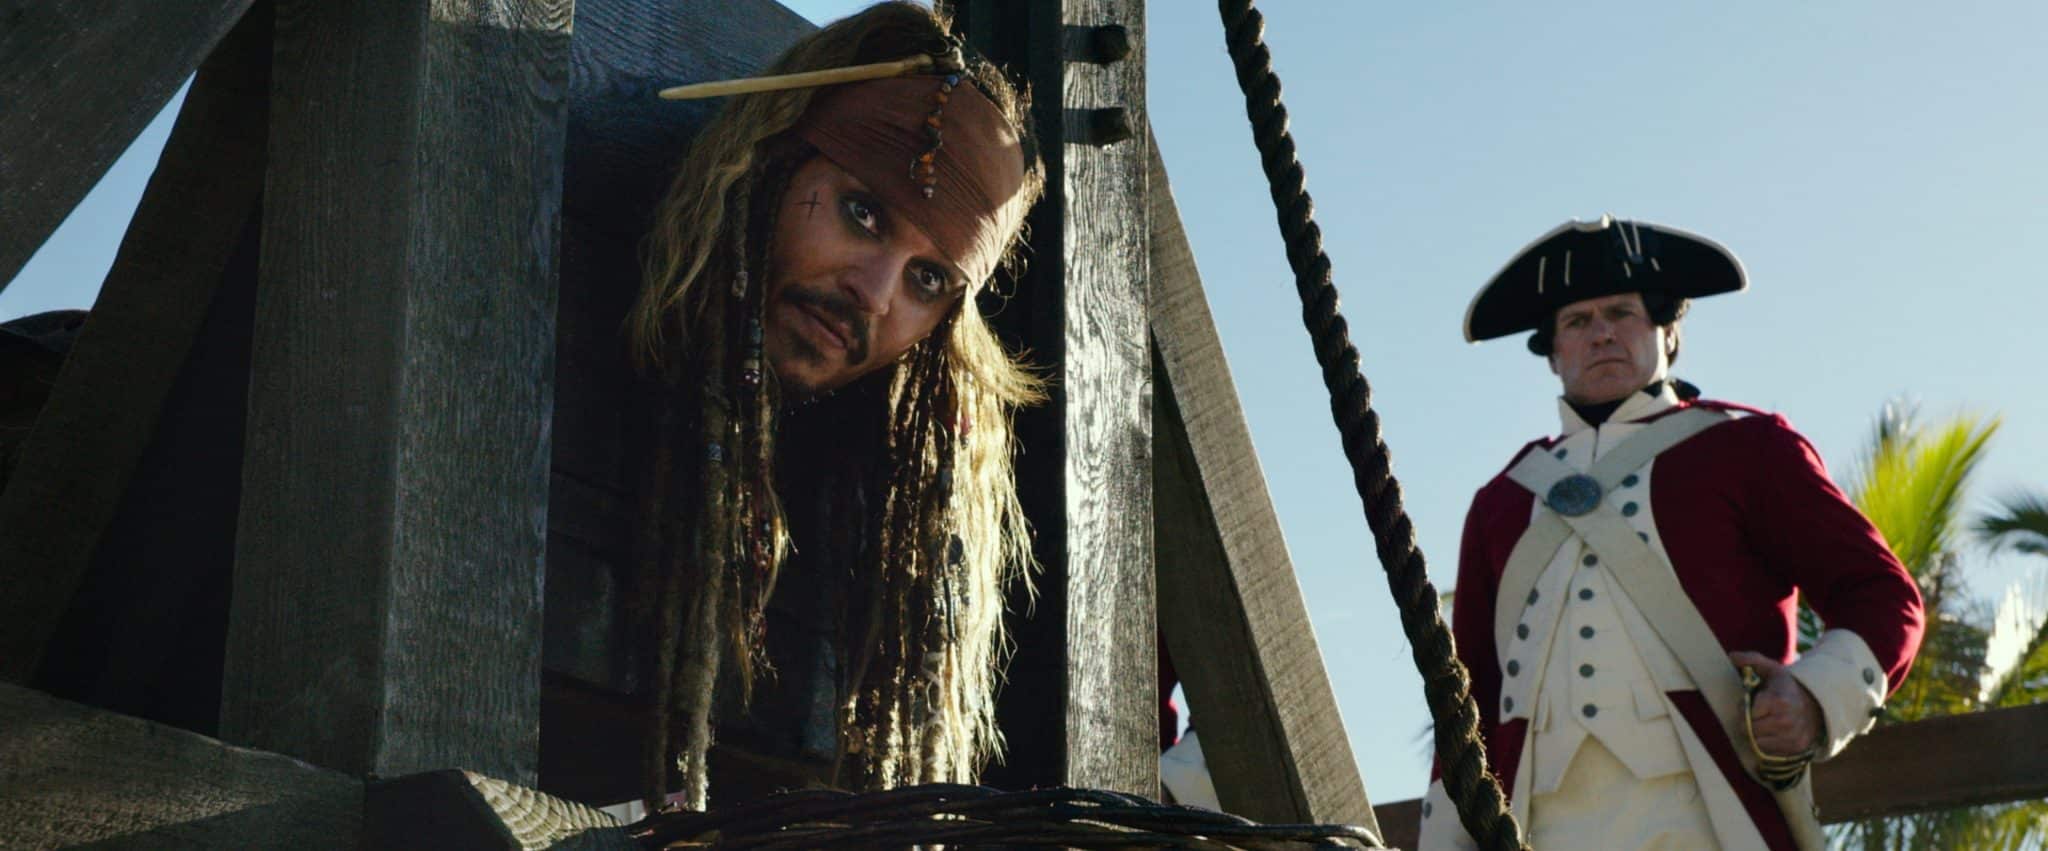 PIRATES OF THE CARIBBEAN: DEAD MEN TELL NO TALES In Theaters NOW!! #PiratesLife